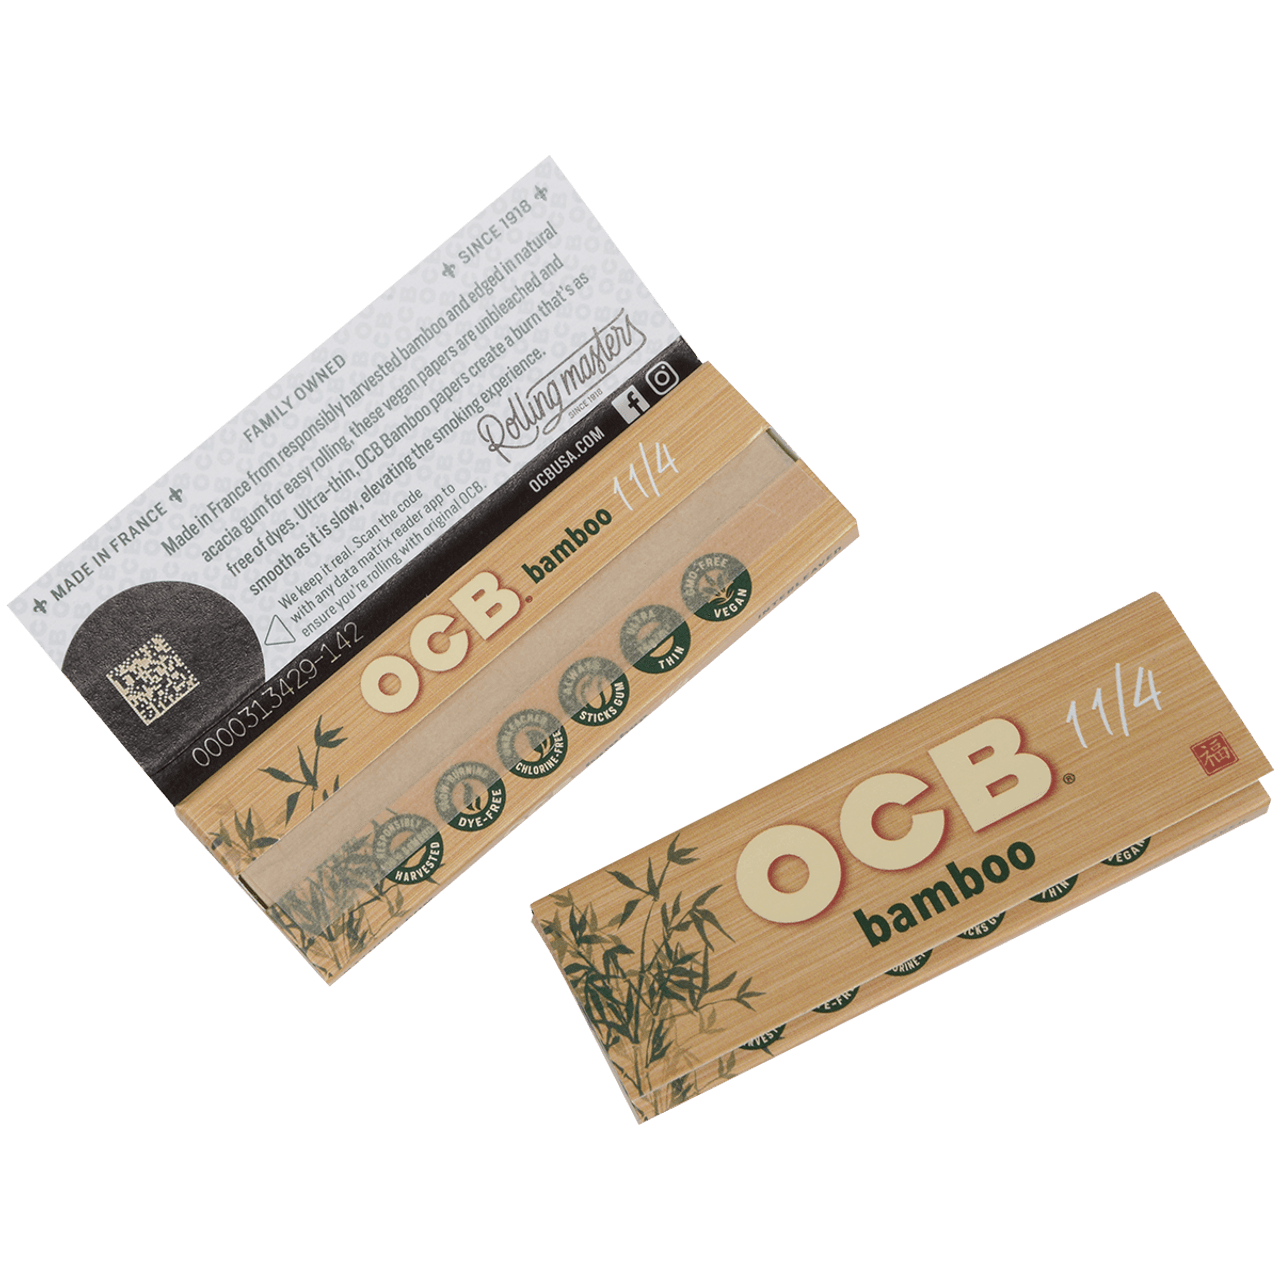 OCB Bamboo Papers - Mr. Bill's Pipe & Tobacco Company